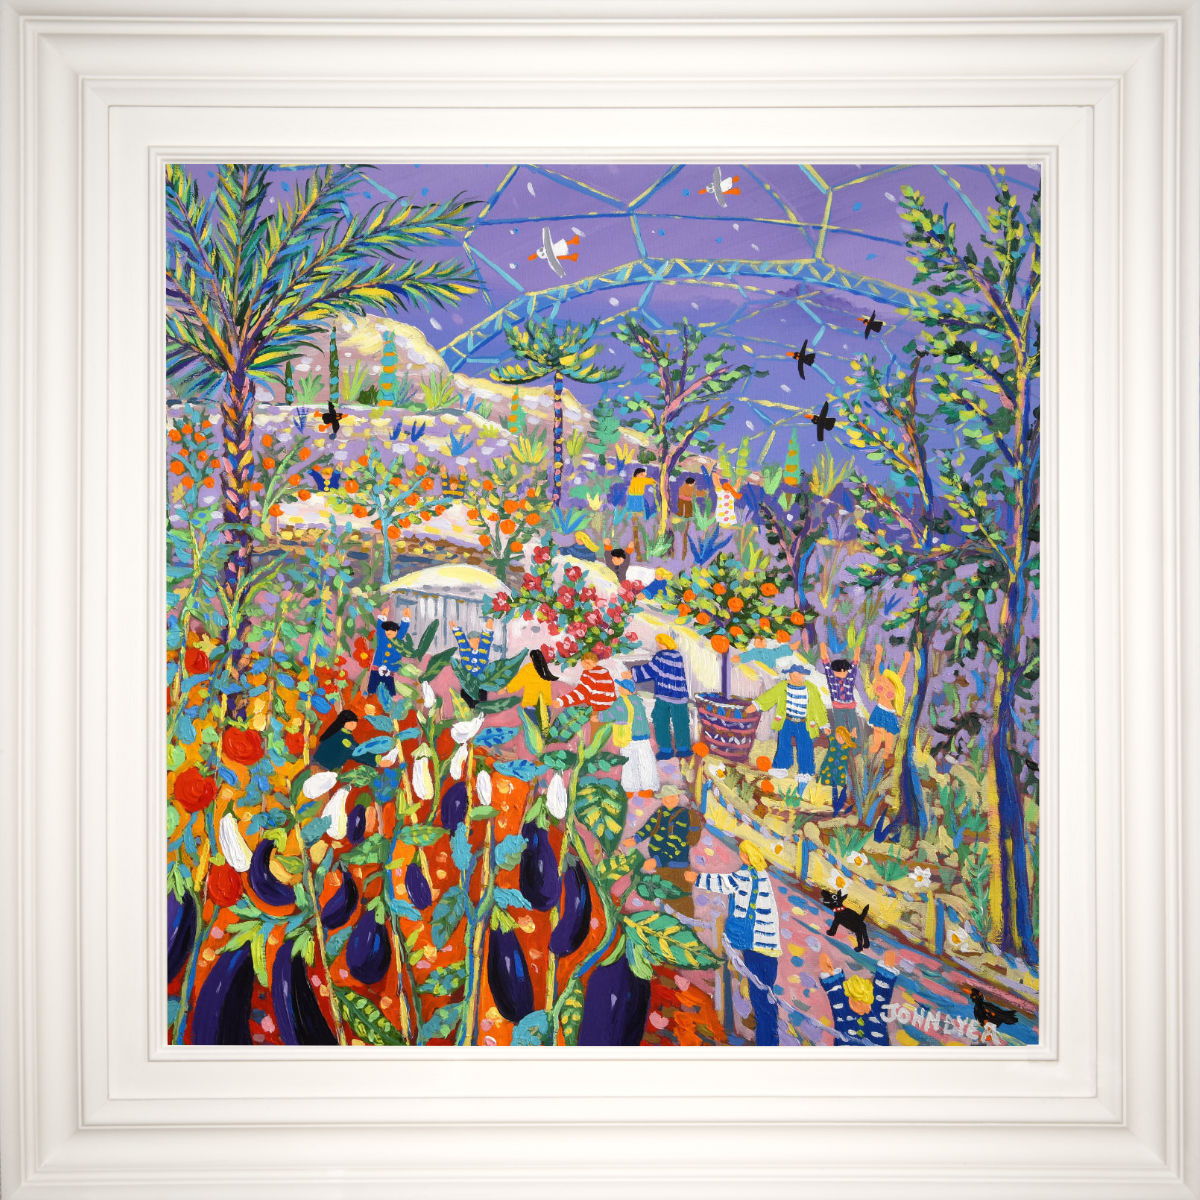 &#39;Mediterranean Colour, Eden Project&#39;. 24x24 inches acrylic on canvas. Garden Paintings of Cornwall by John Dyer from our Cornwall Art Gallery